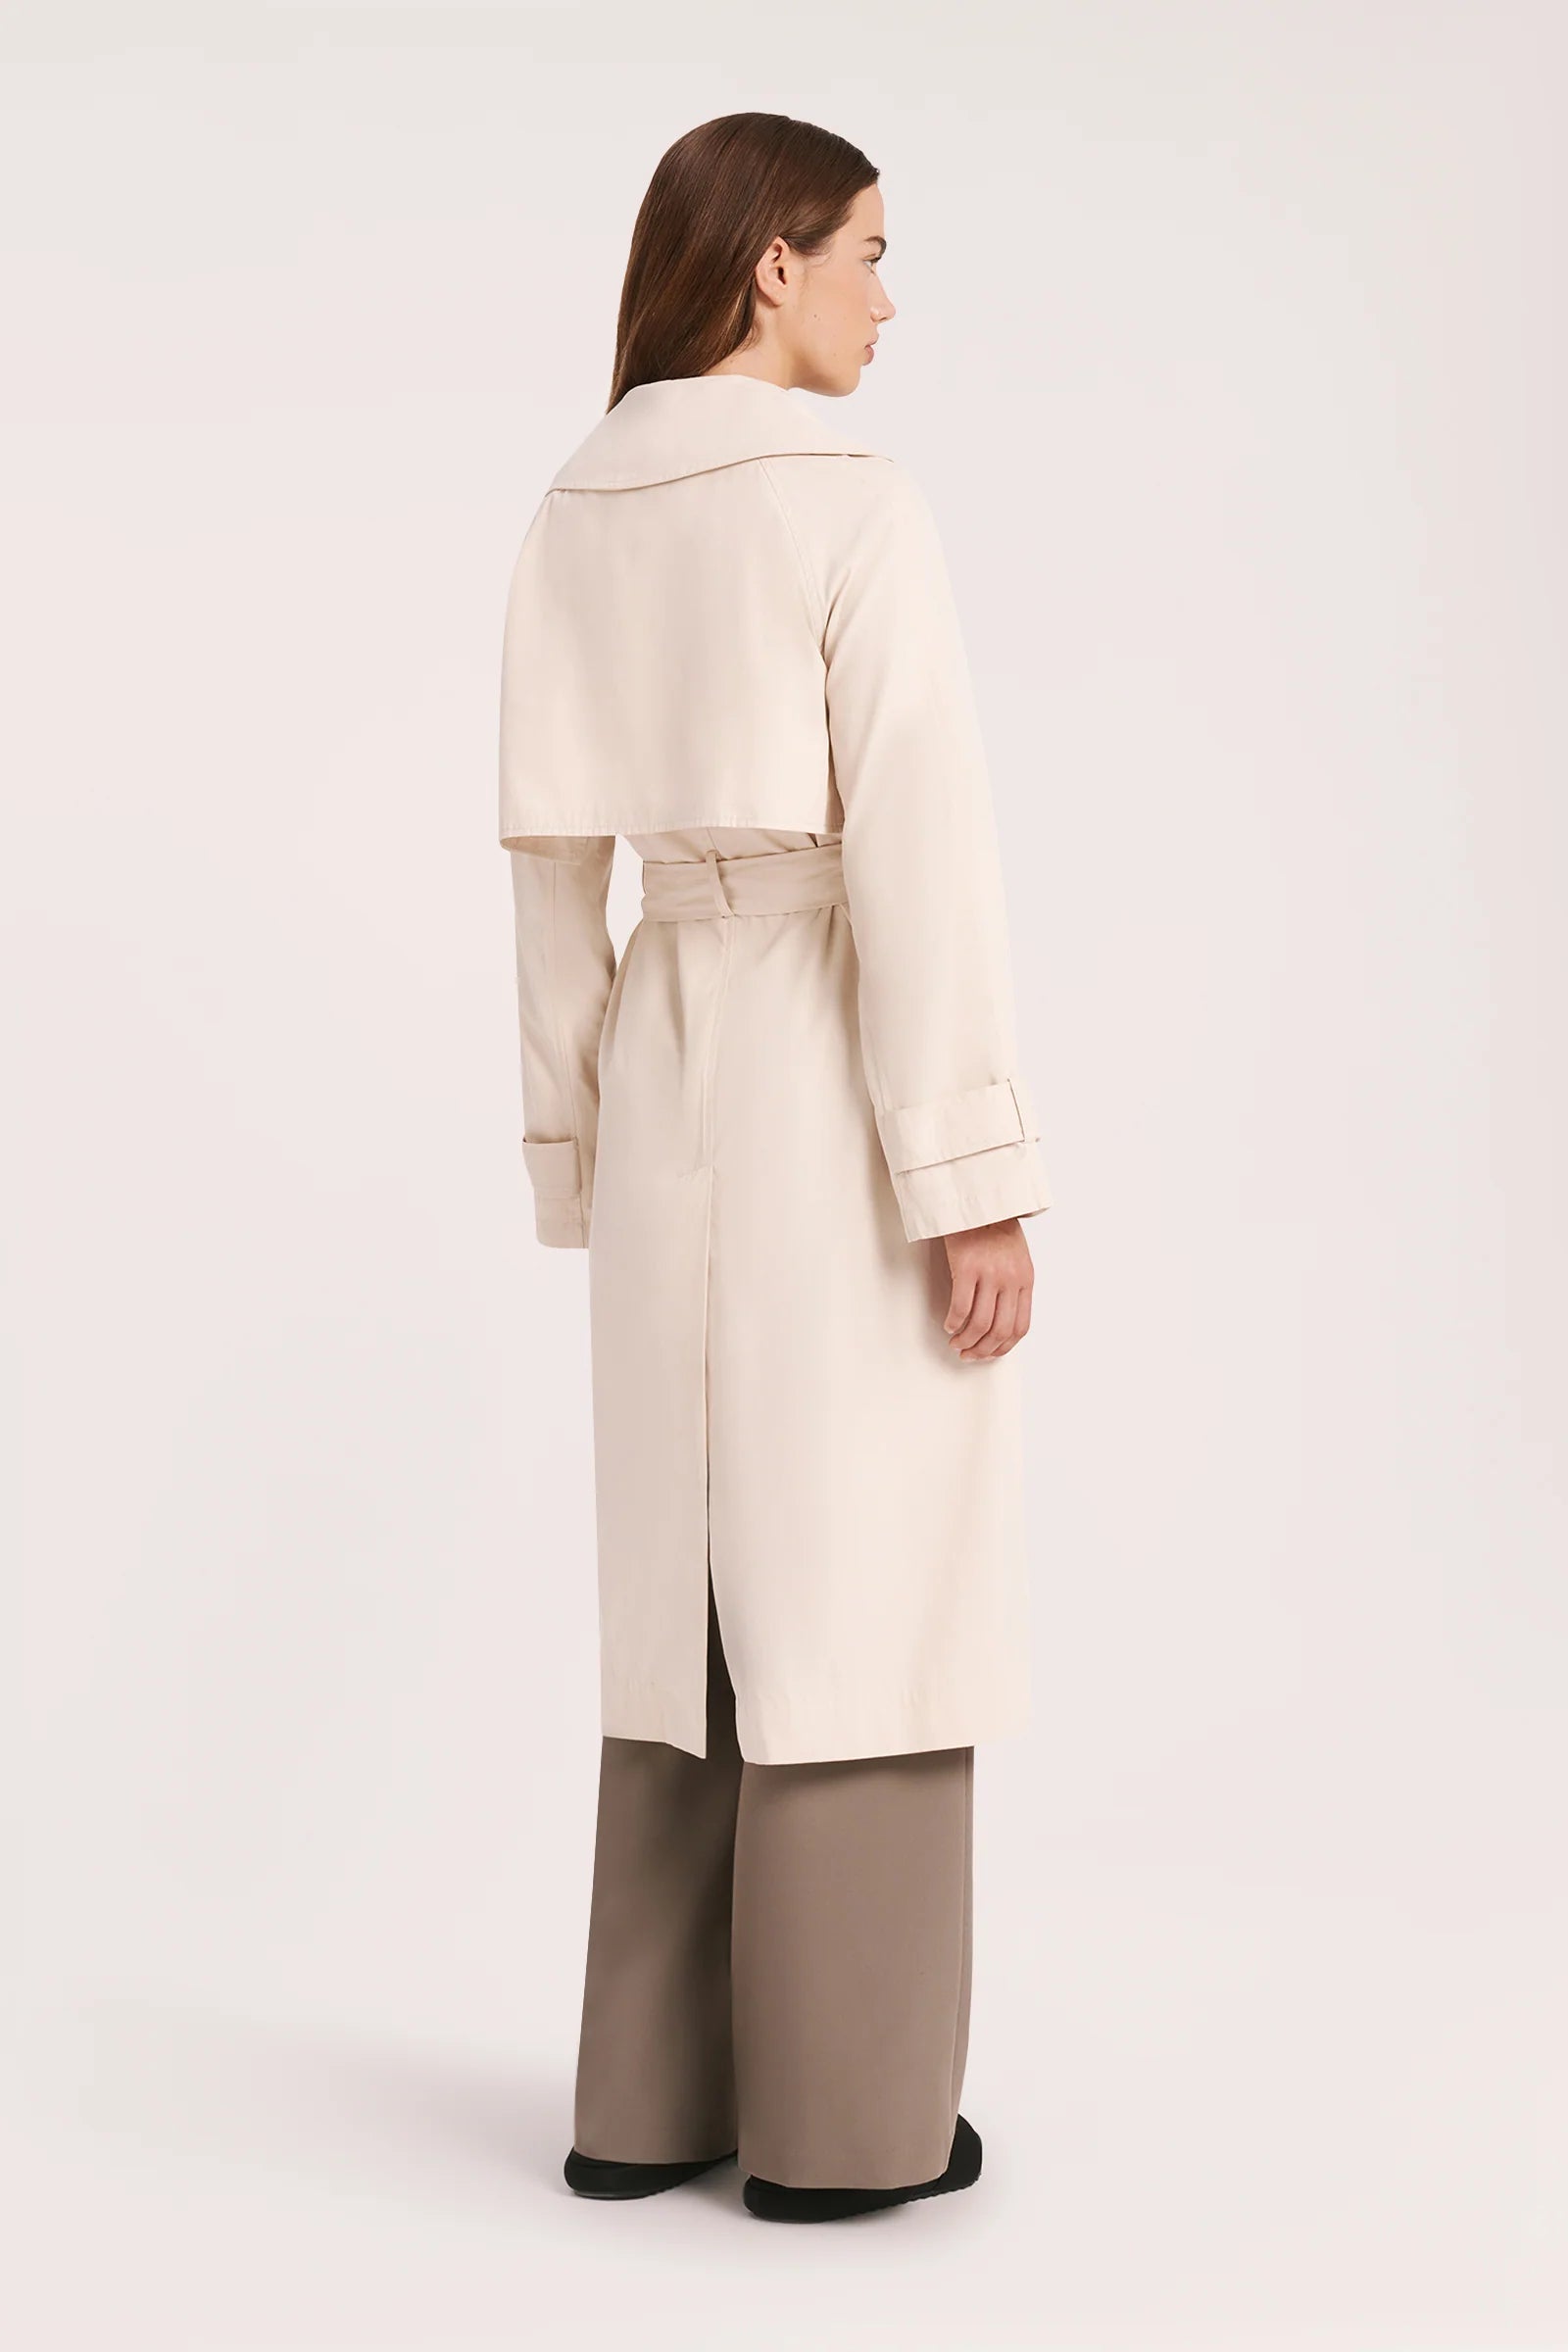 The Odyssey Trench coat is made from a sturdy cotton nylon blend with a peached/sueded finish. Fit is relaxed with wide full length sleeves &amp; body length finishing at knee level. Features include traditional trench coat detailing, double breasted button opening, waist tie &amp; storm flap.&nbsp;